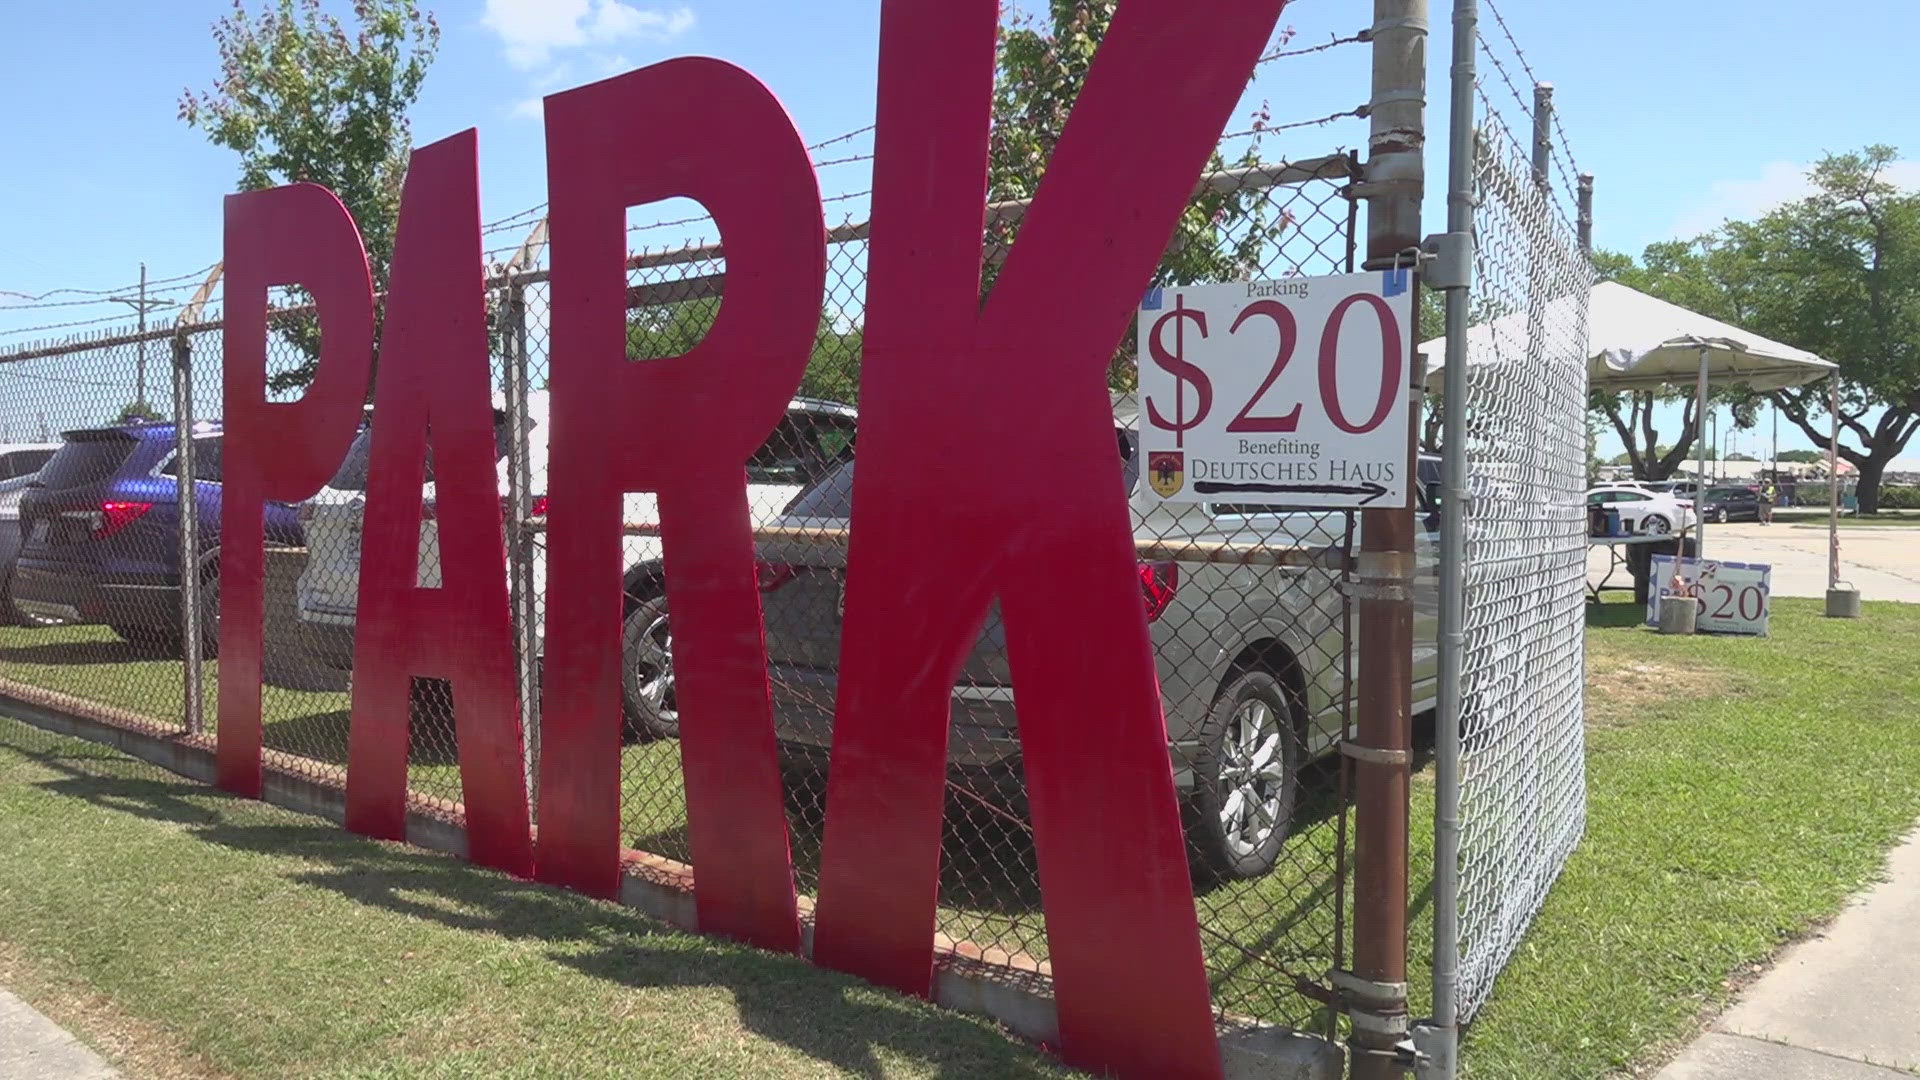 WWL Louisiana's Rachel Handley checked out the options, and has what you should know before you head out to Jazz Fest at New Orleans Fair Grounds.